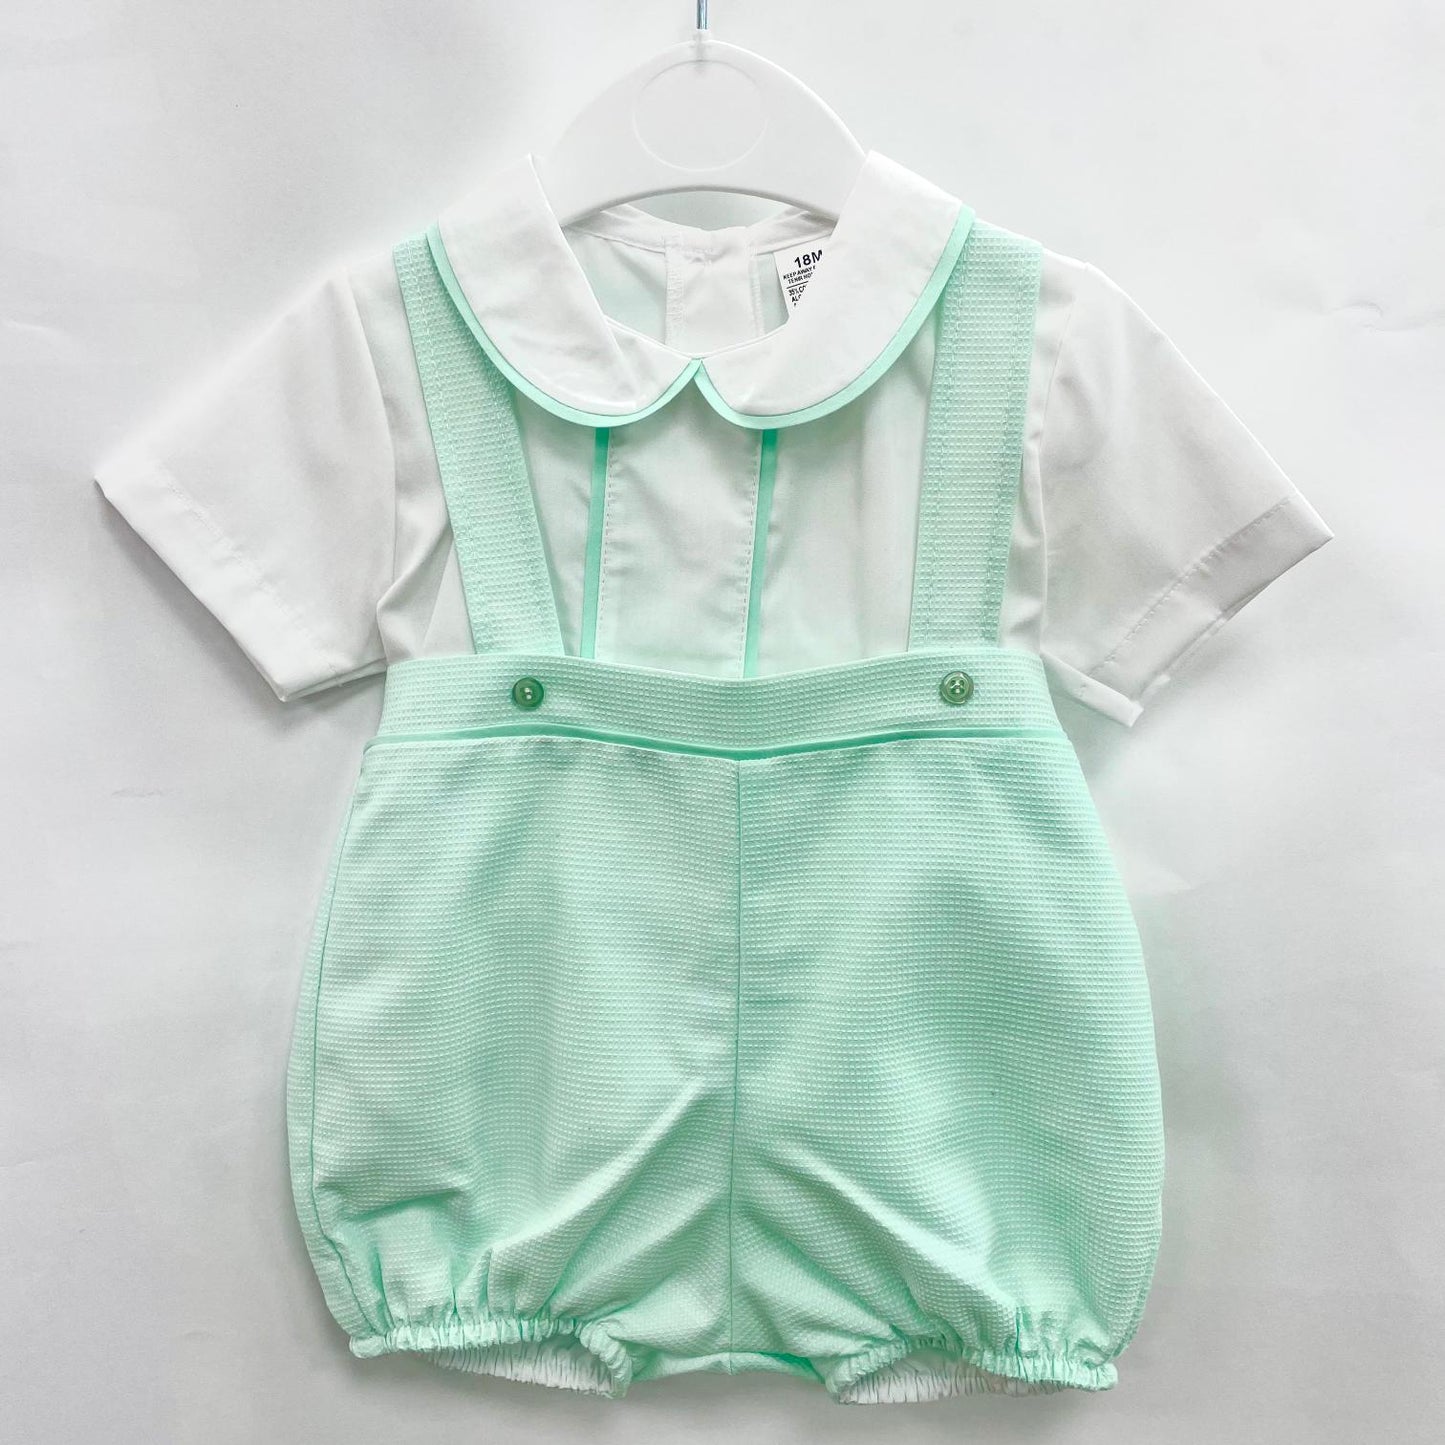 Mint Green and White Romper (was £26.99 now £10)